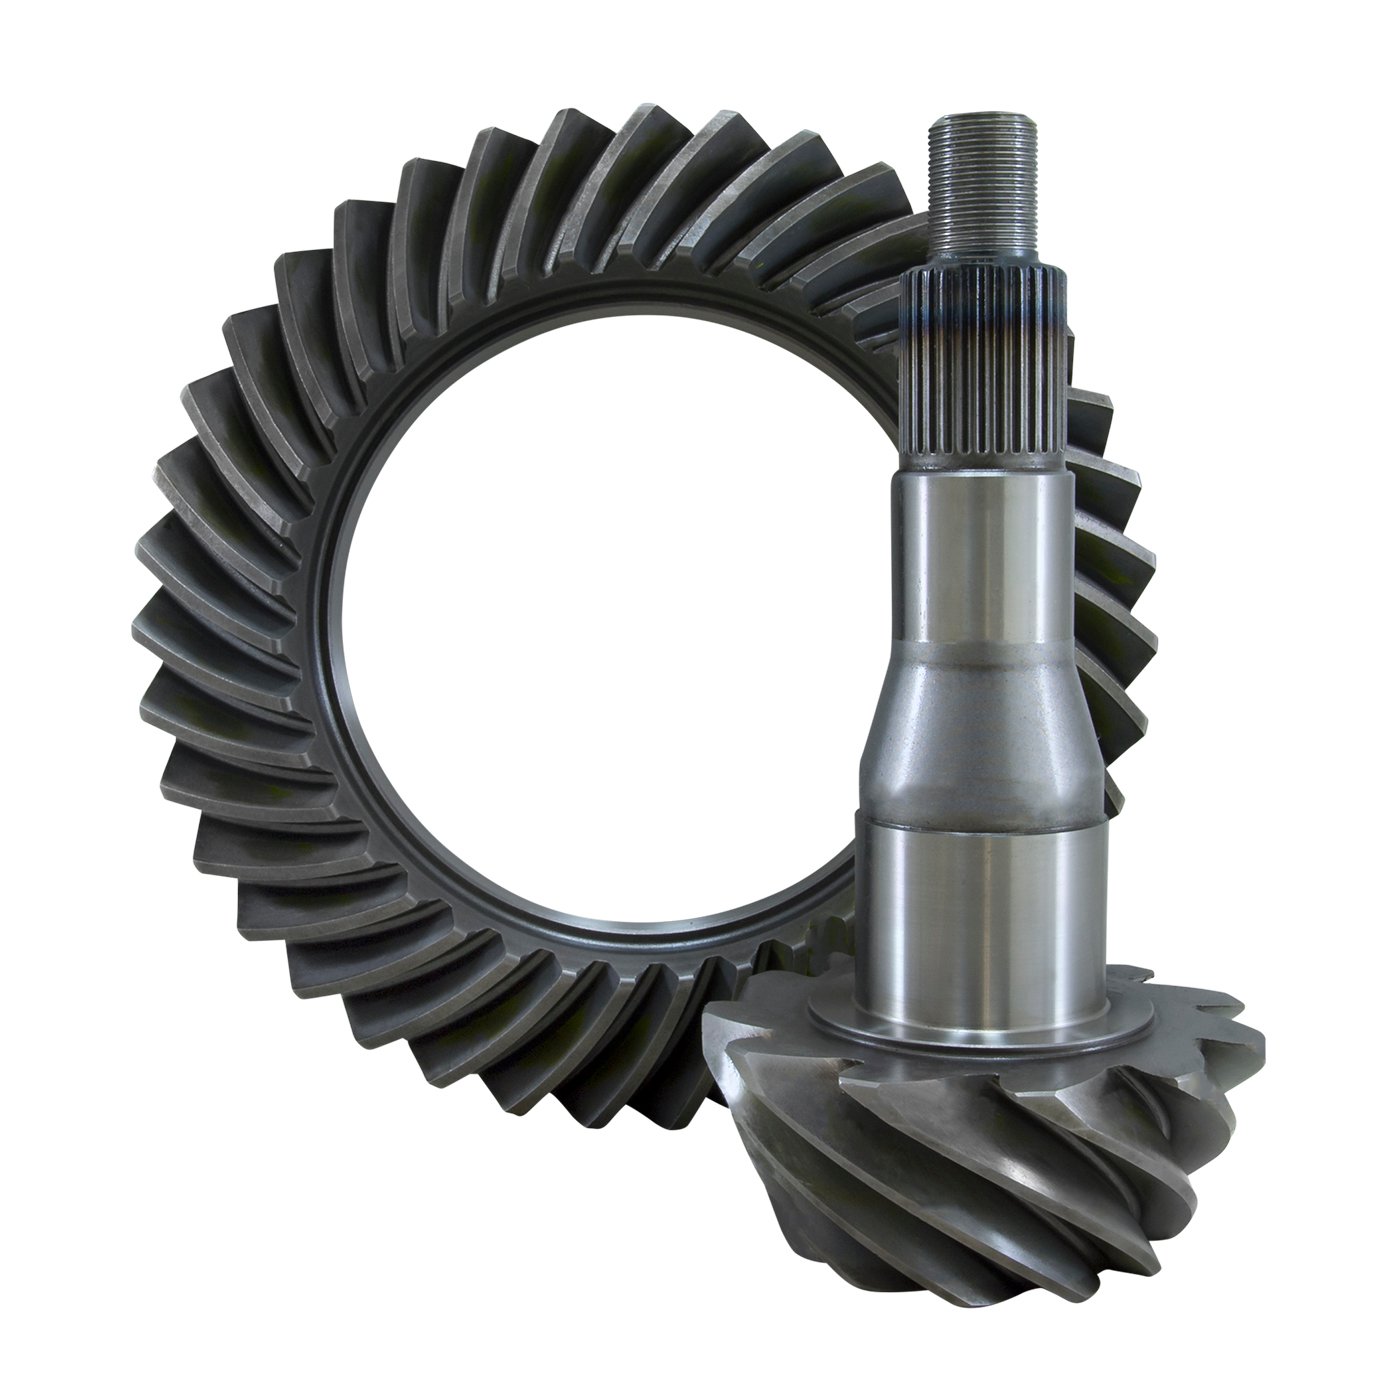 USA Standard 36157 Ring & Pinion Gear Set, For '10 & Down Ford 9.75 in., 4.11 Ratio